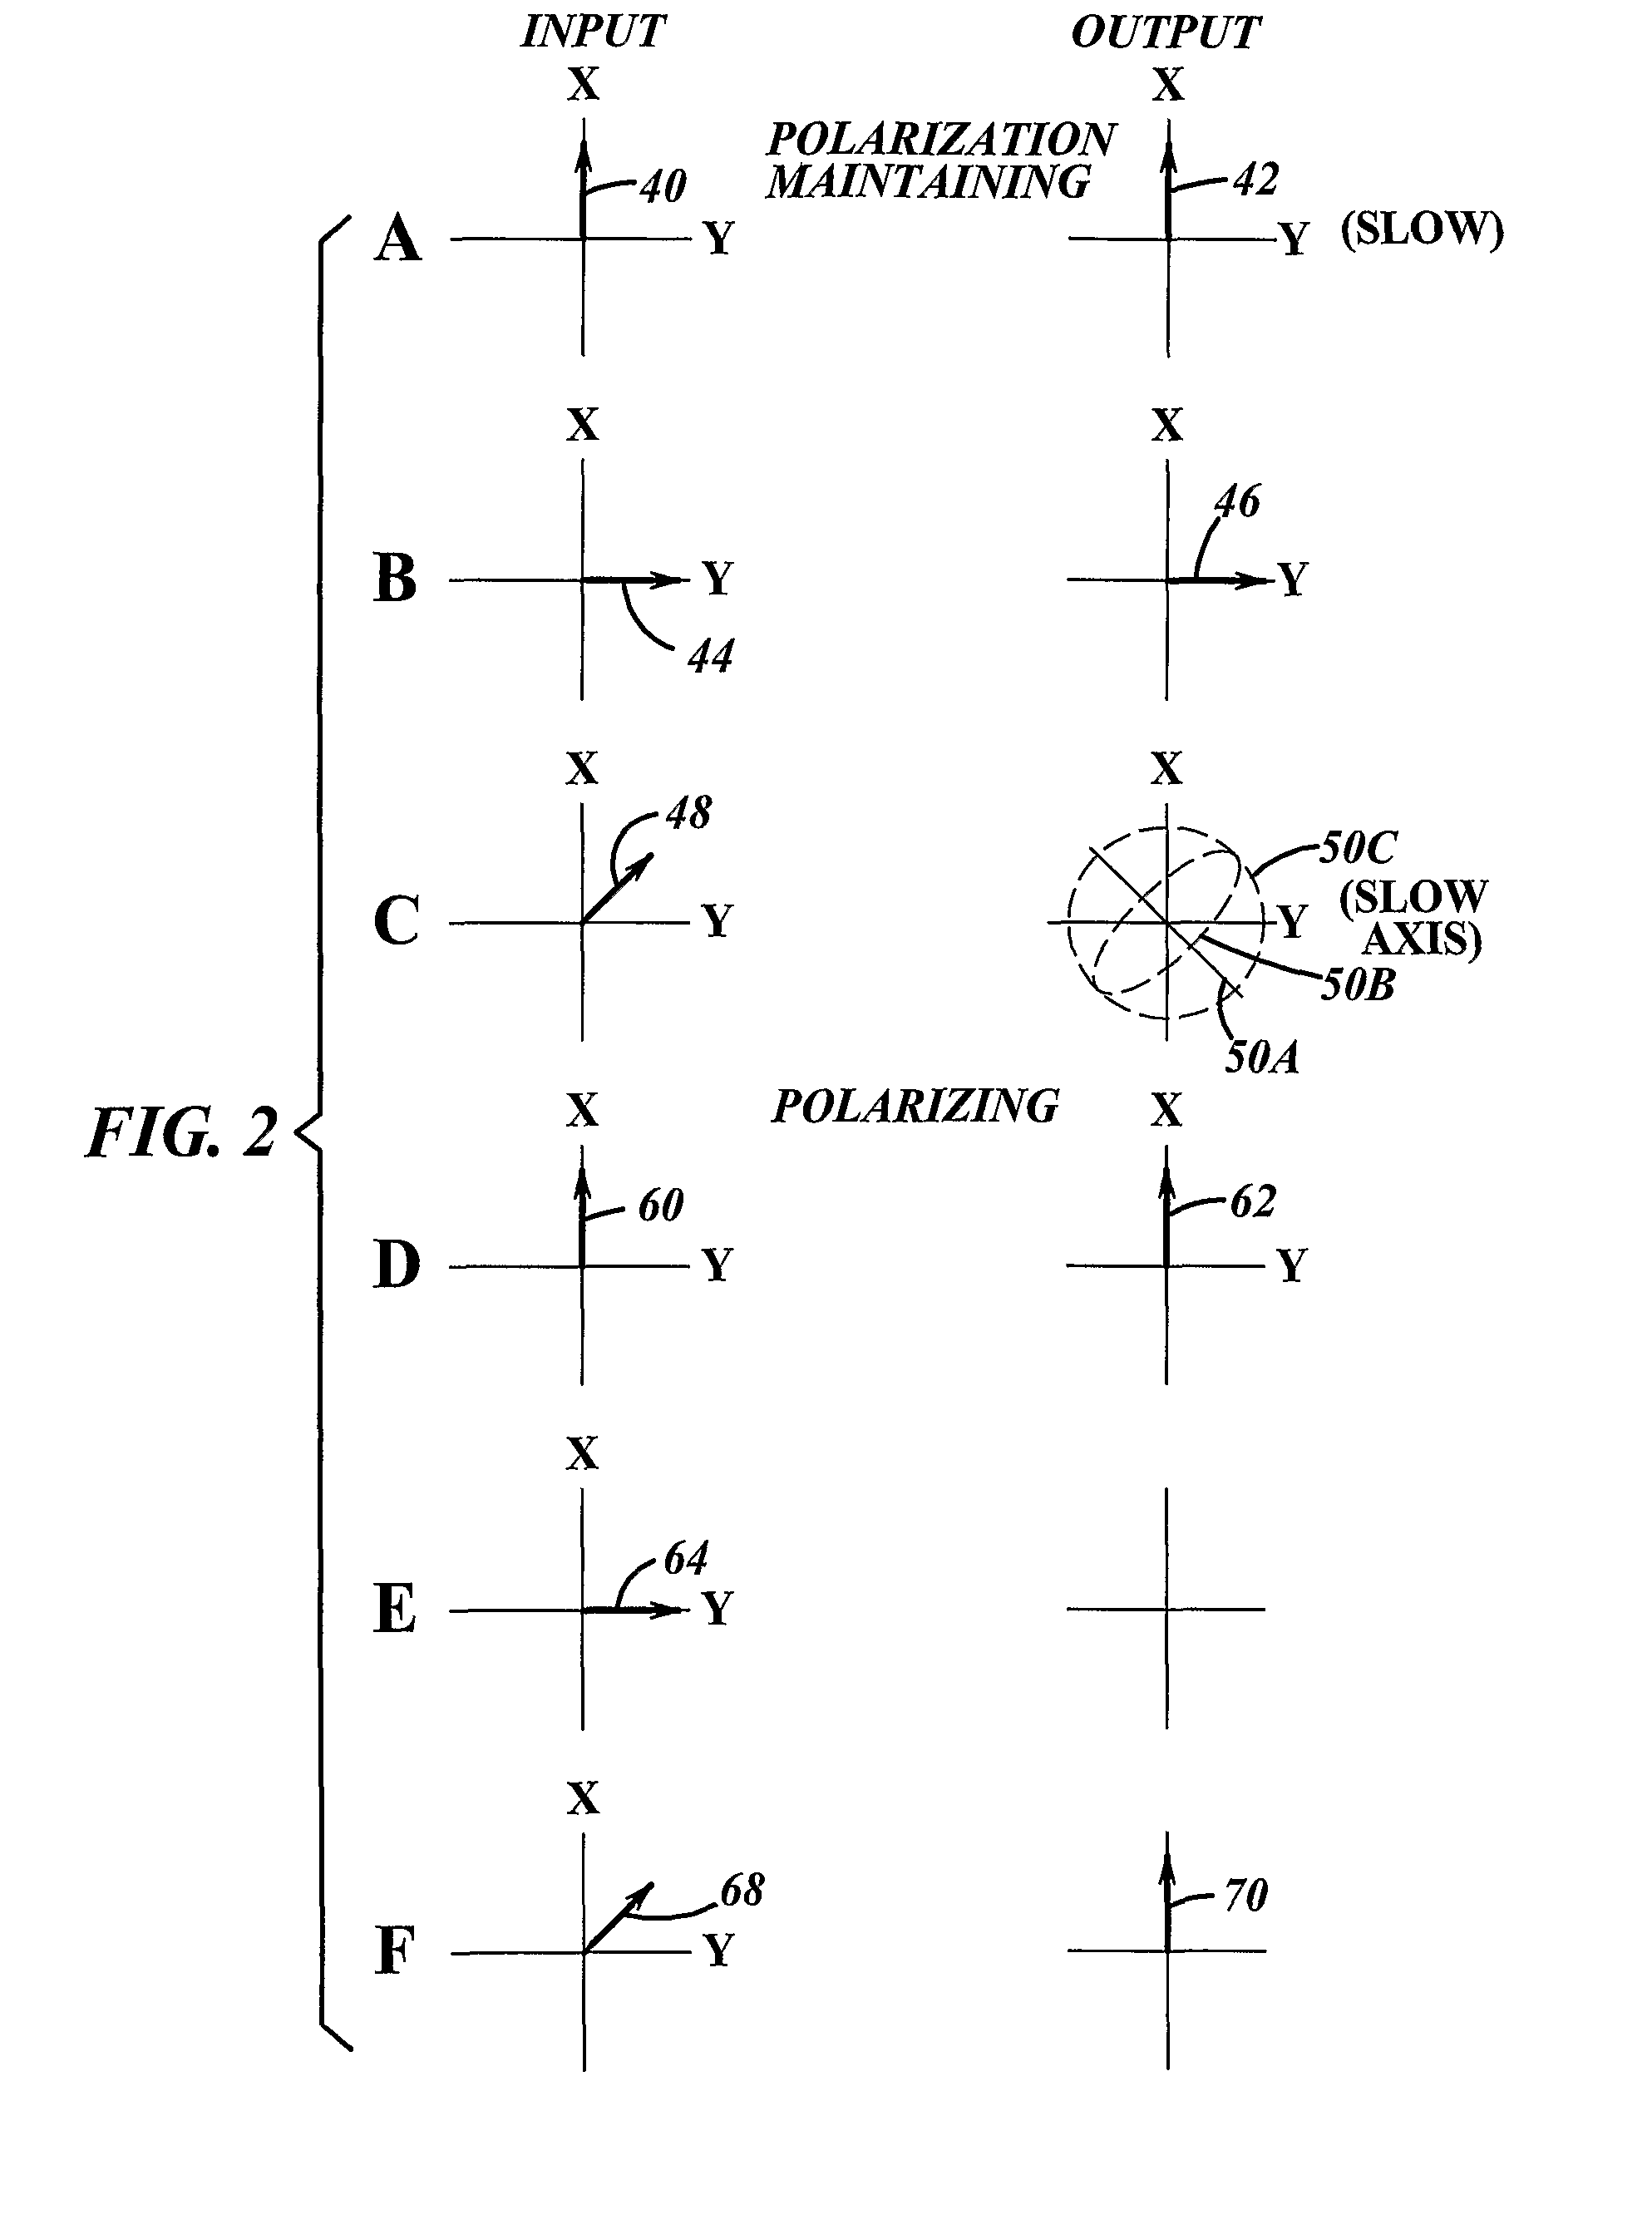 Method and apparatus for providing light having a selected polarization with an optical fiber